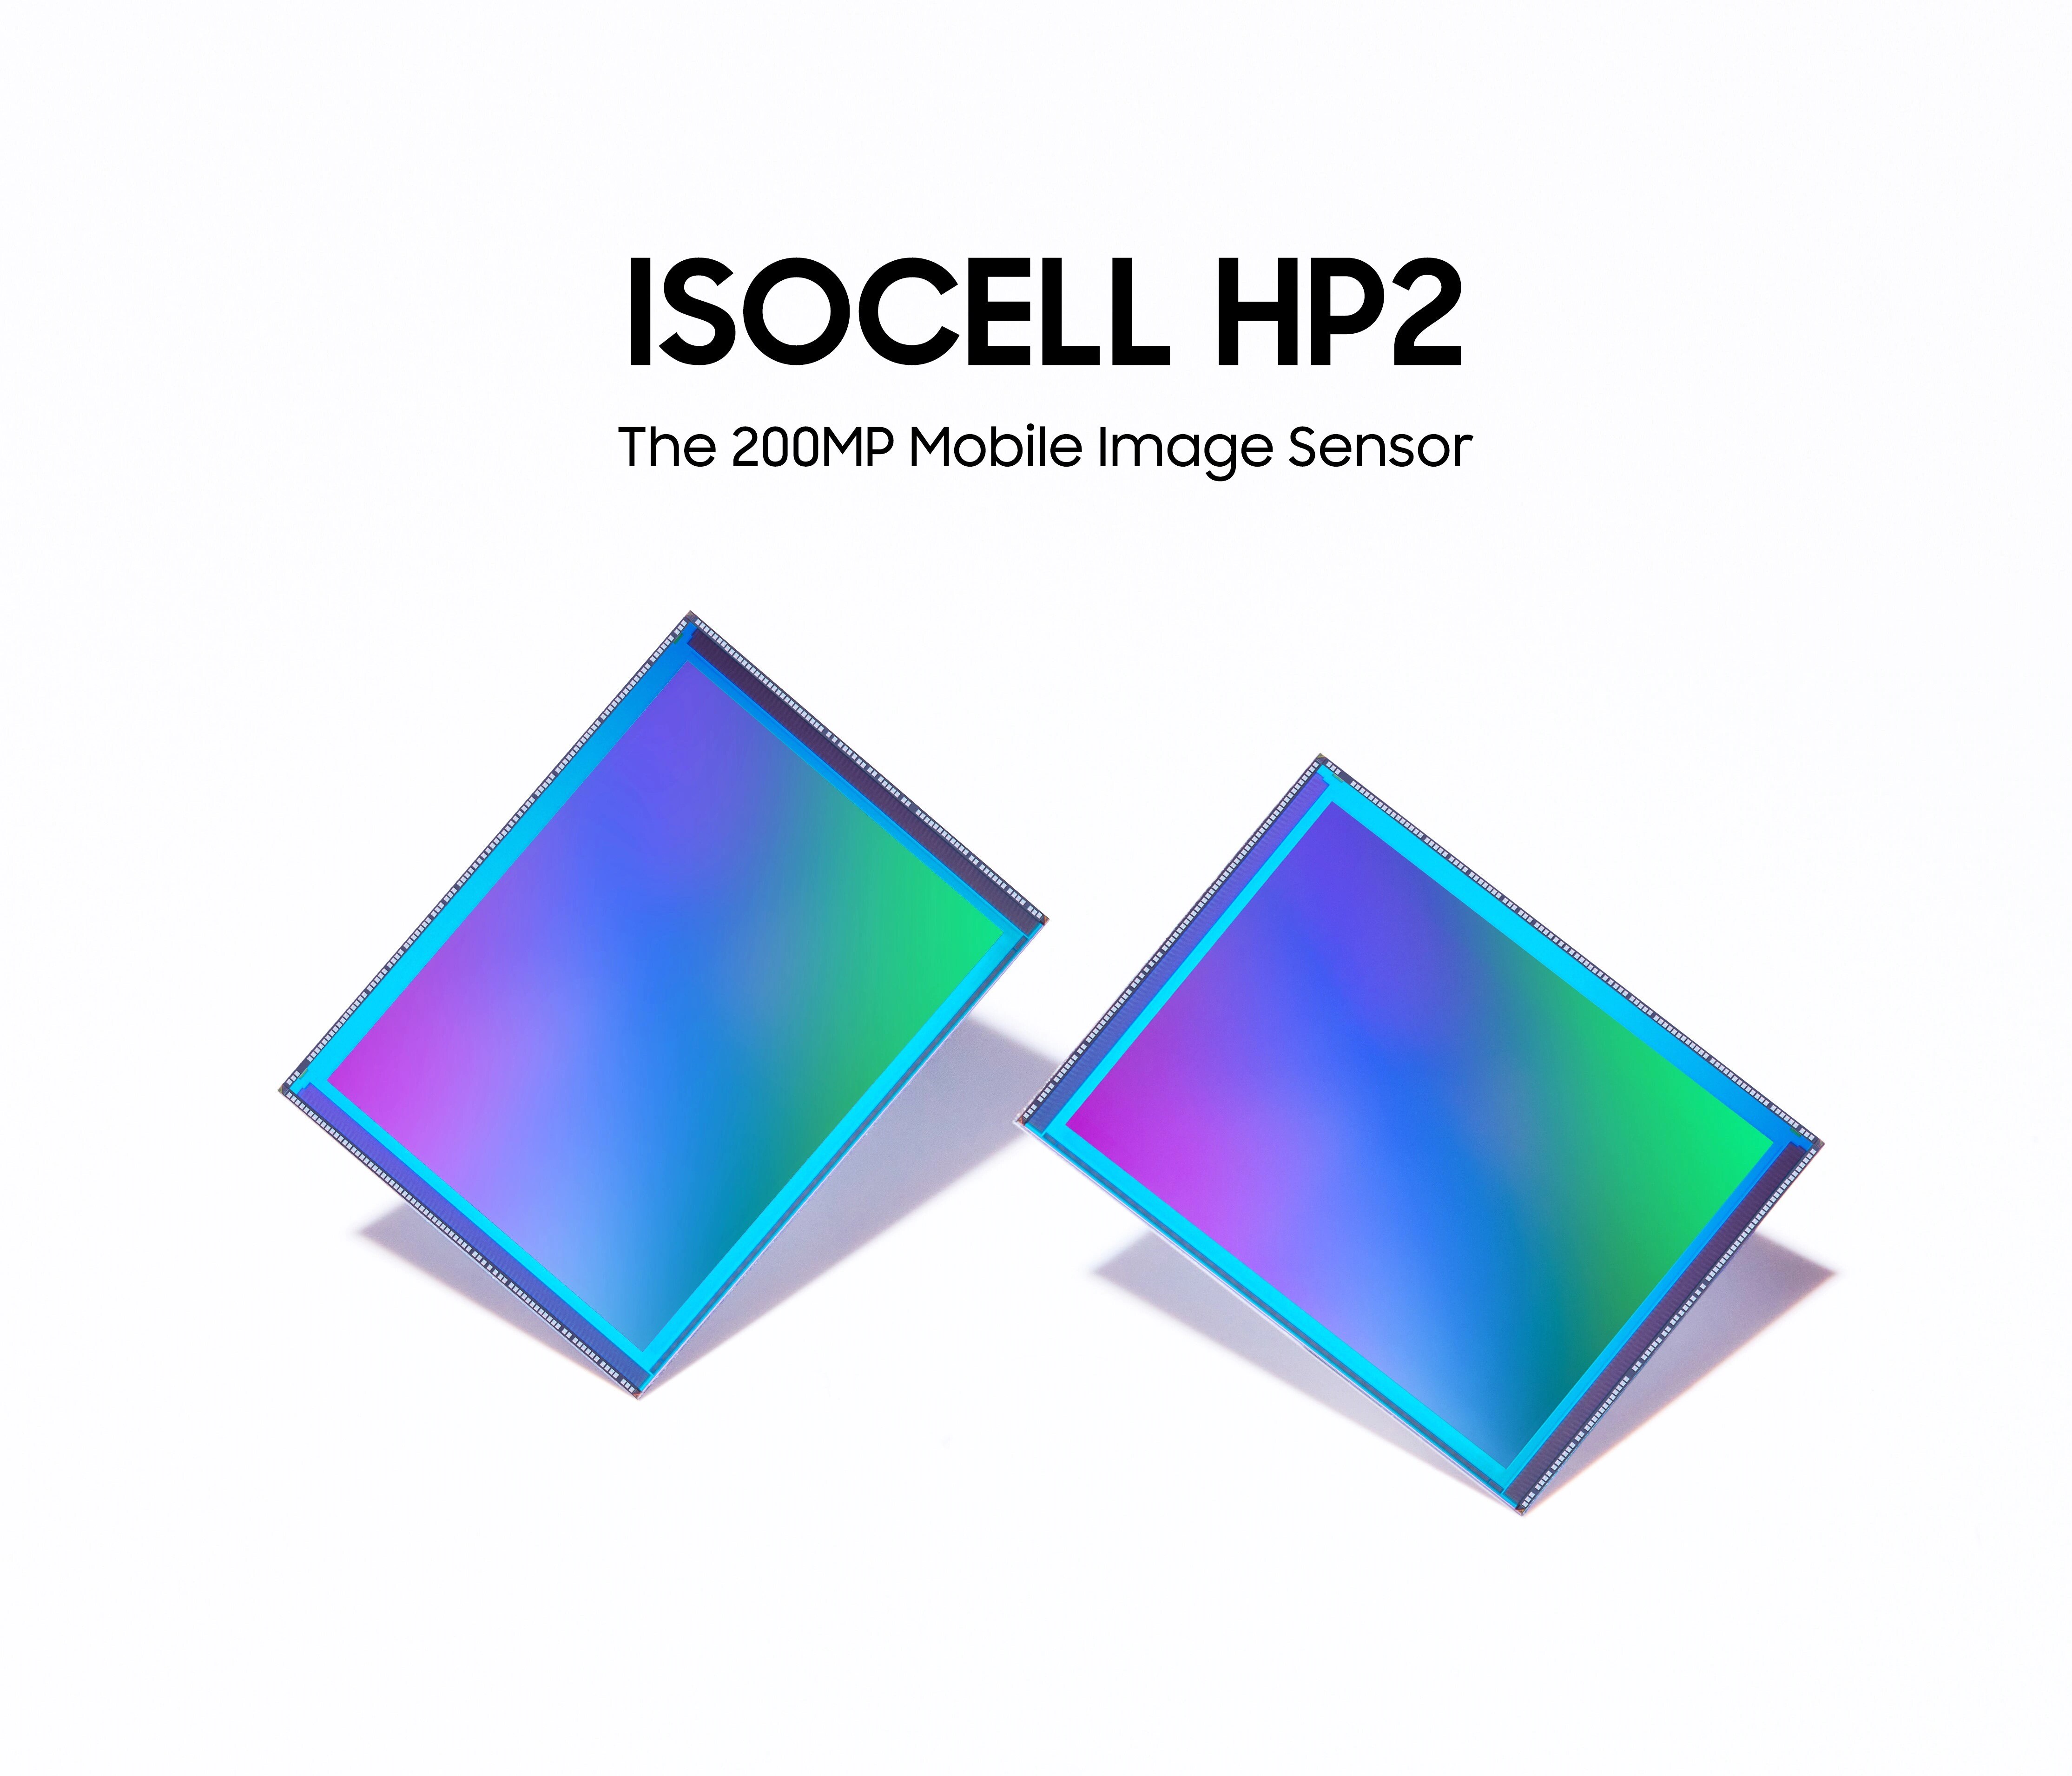 Introducing ISOCELL HP2: Experience More Pictures and Epic Details